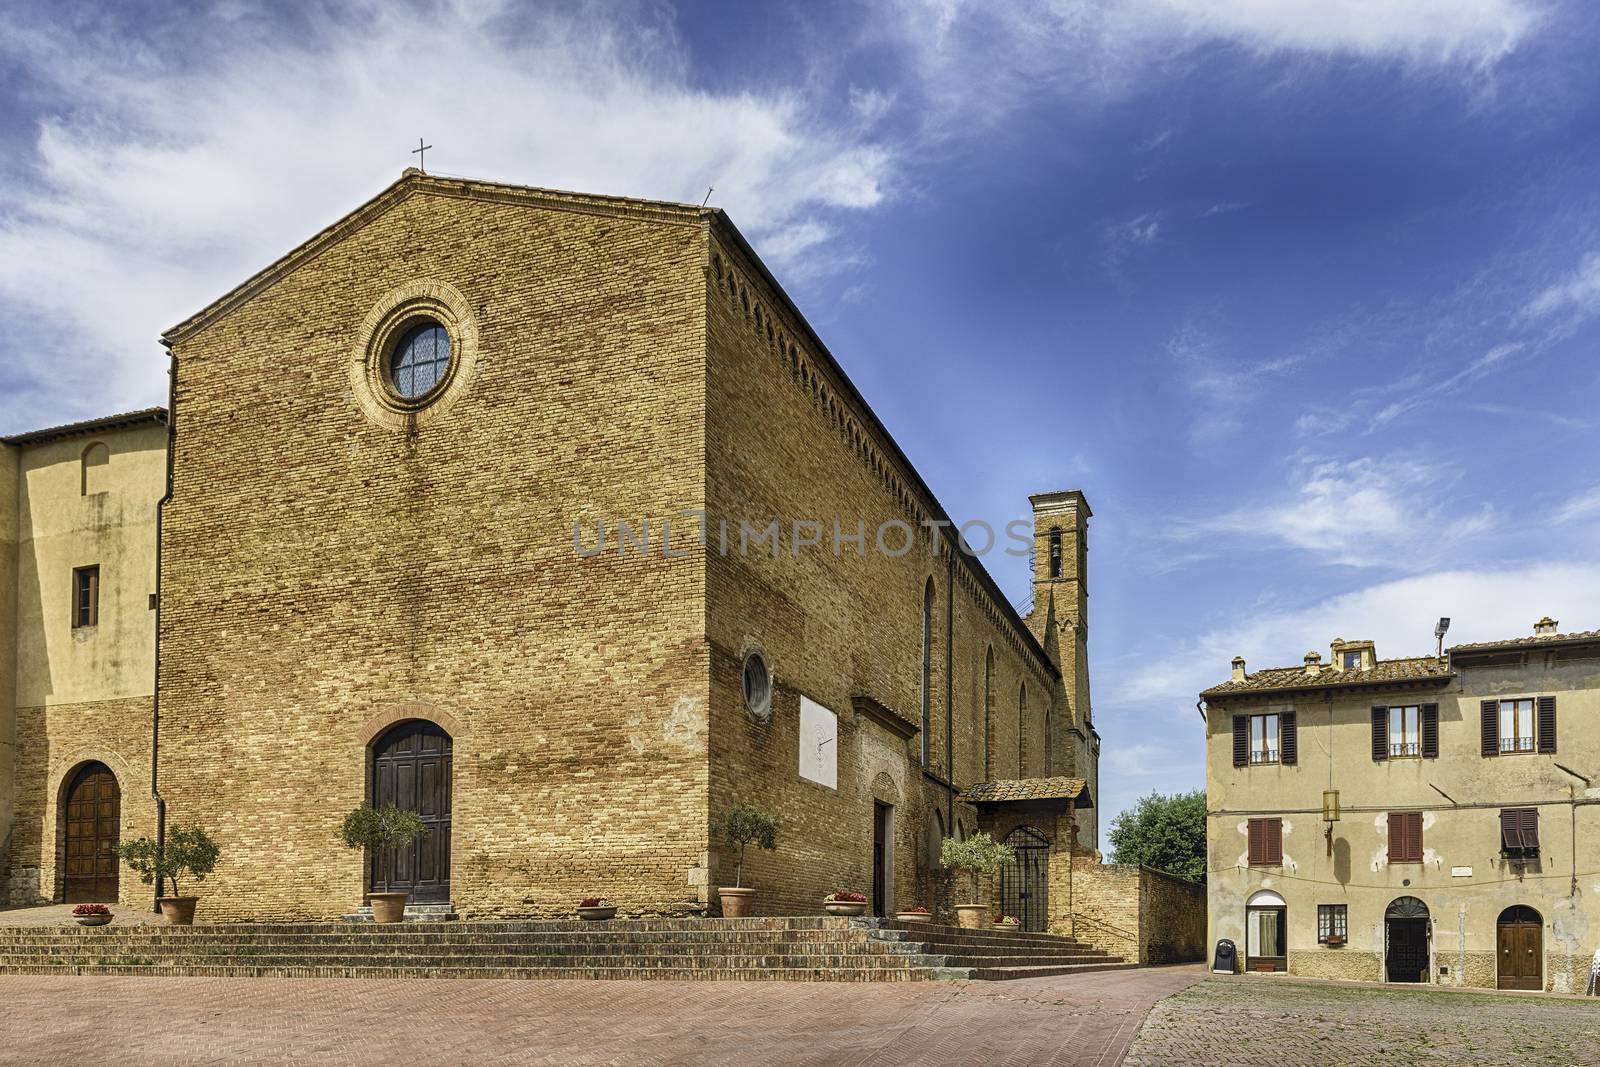 Church of Sant'Agostino, landmark in the medieval town of San Gimignano, Tuscany, Italy